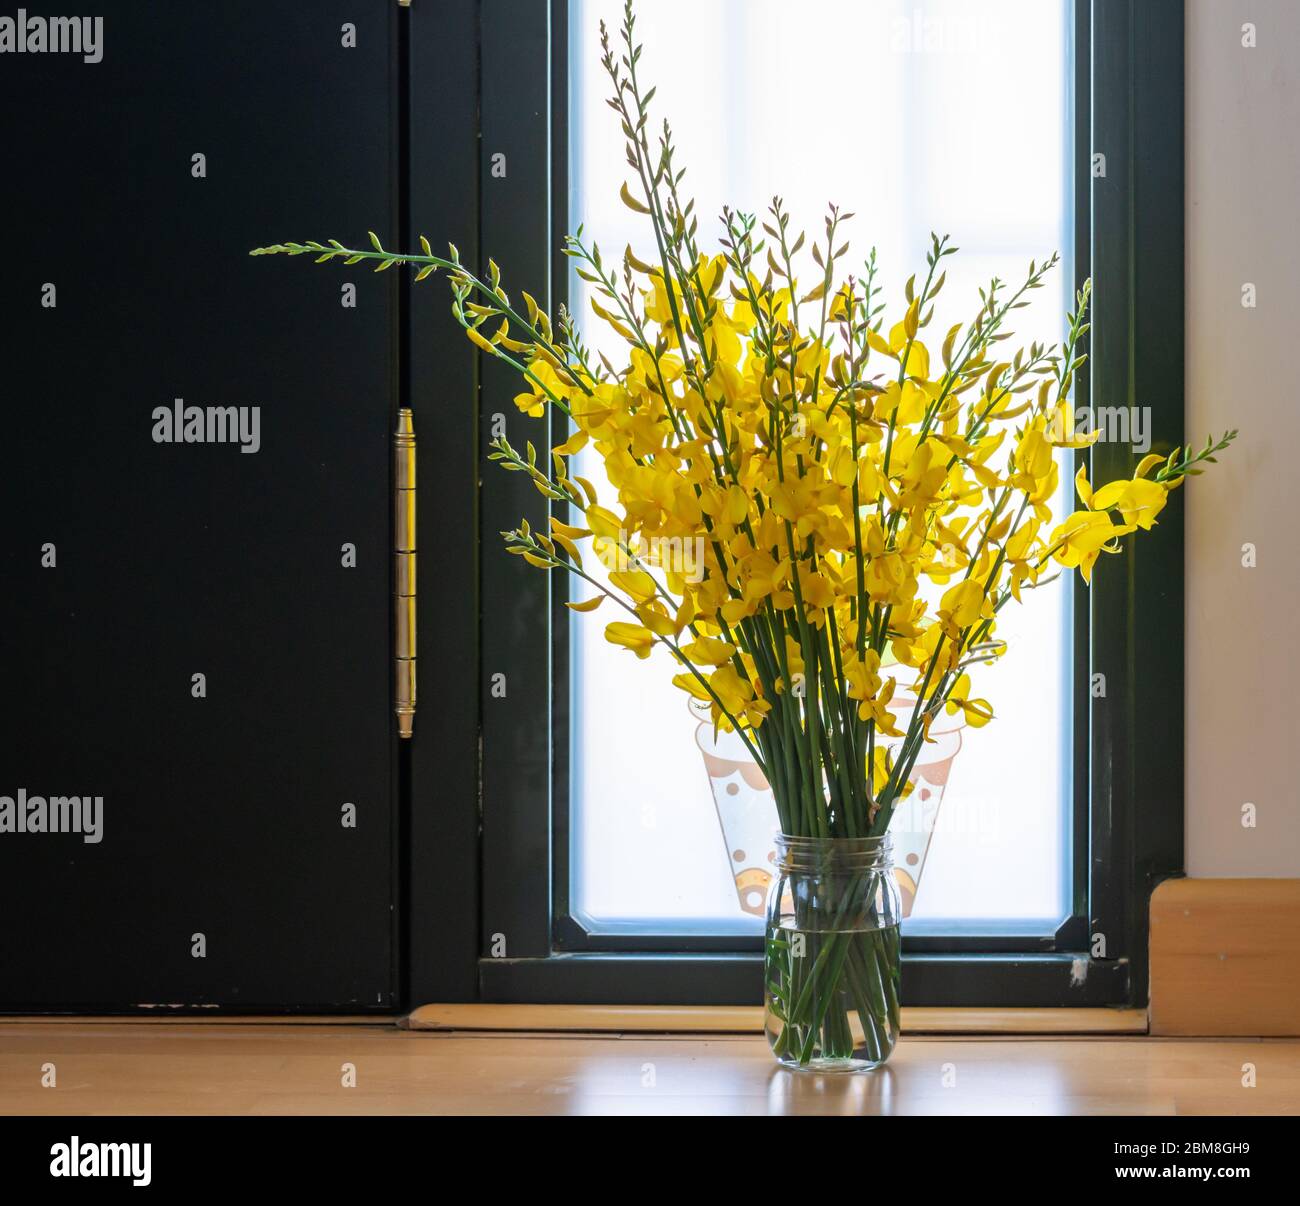 Interior decoration: Vase with yellow genista flowers next to the front door of the home Stock Photo